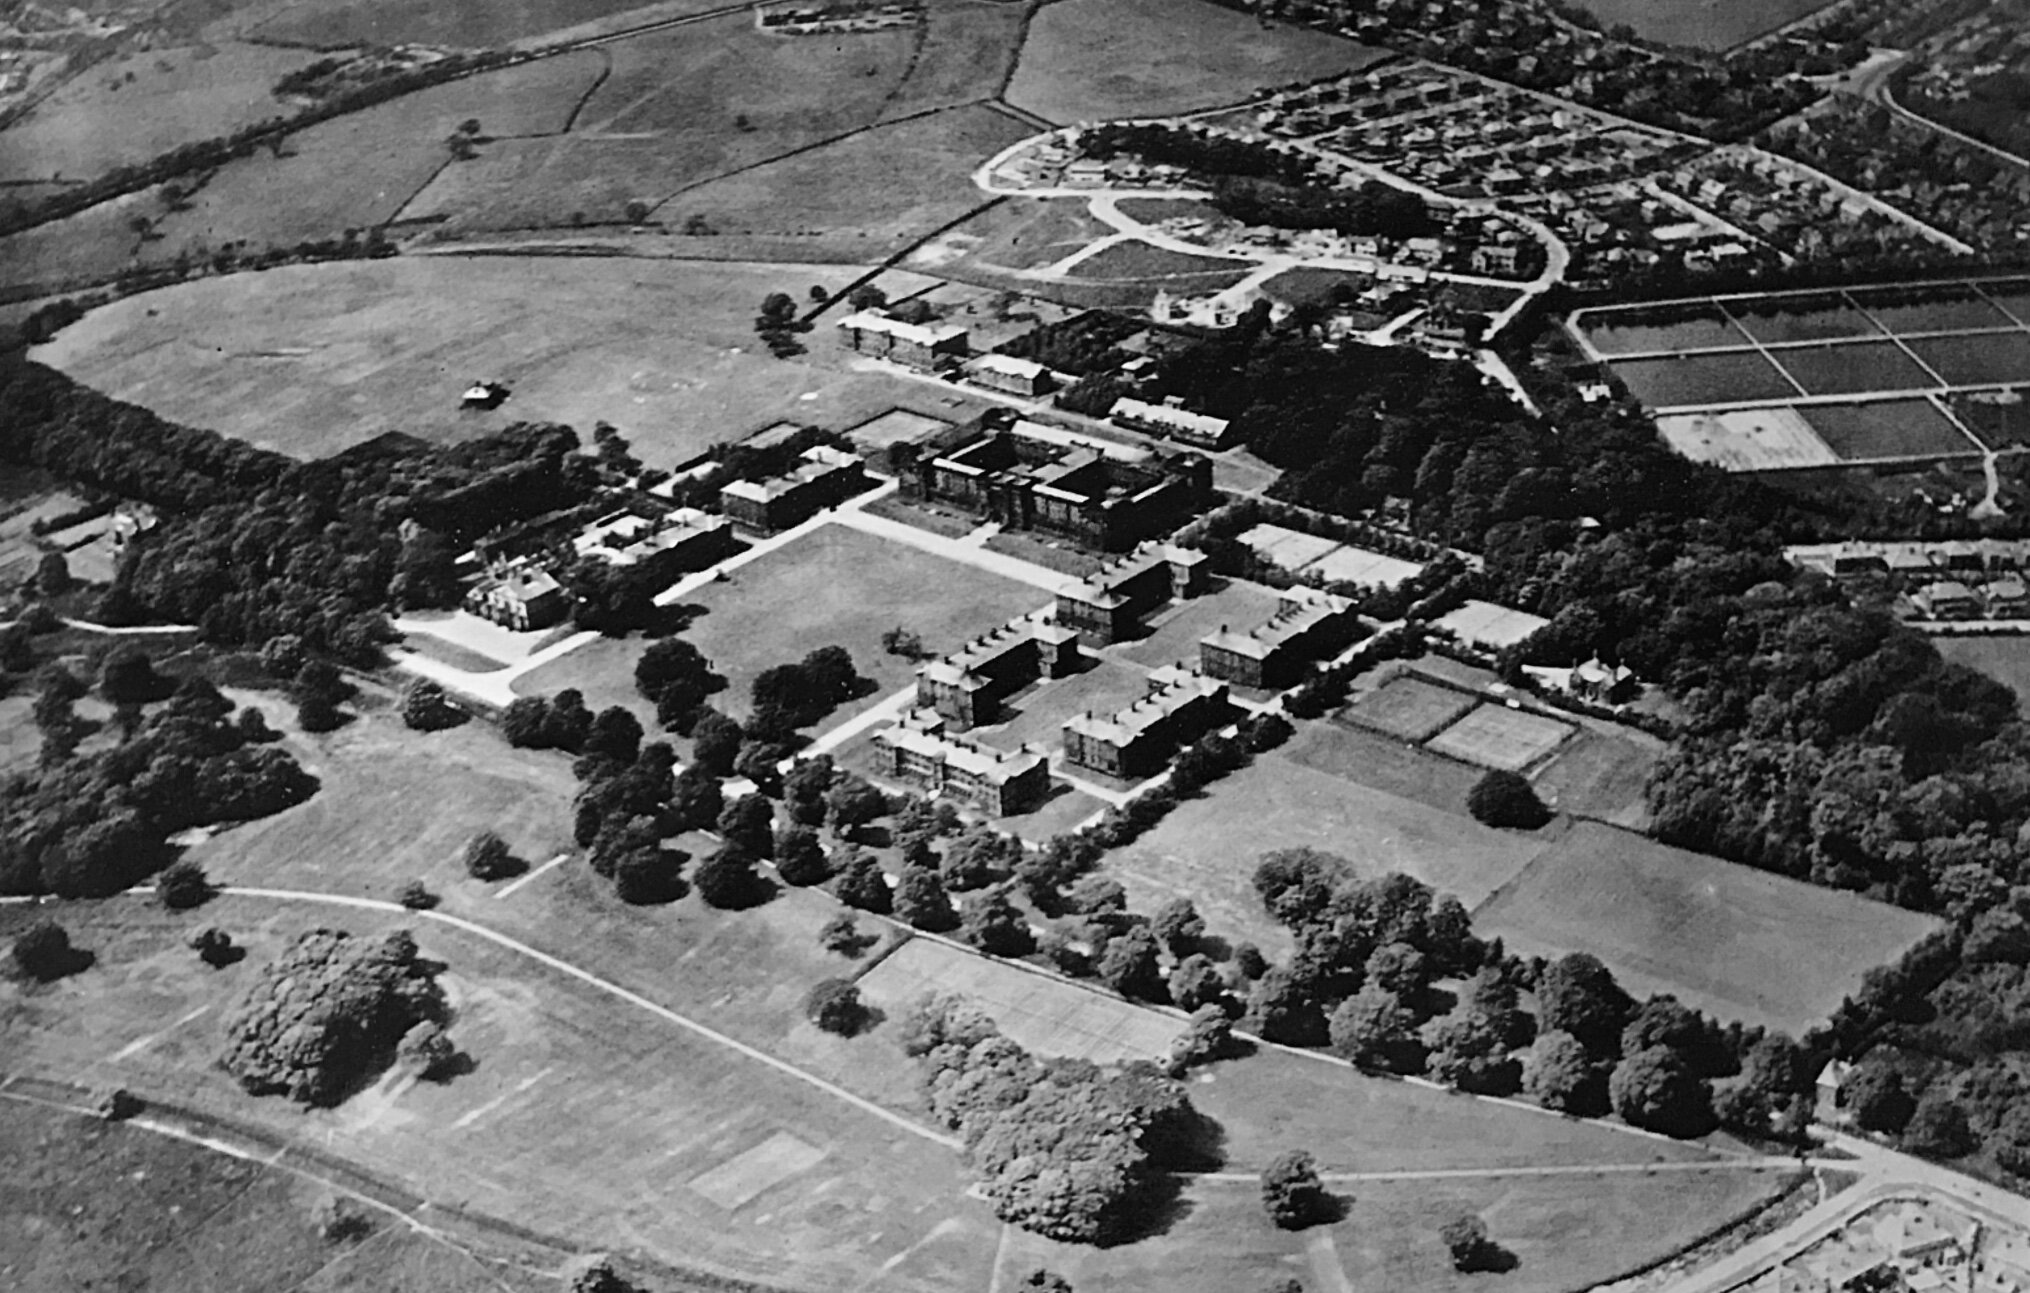 Beckett Park and Leeds City Training College, mid 1930s